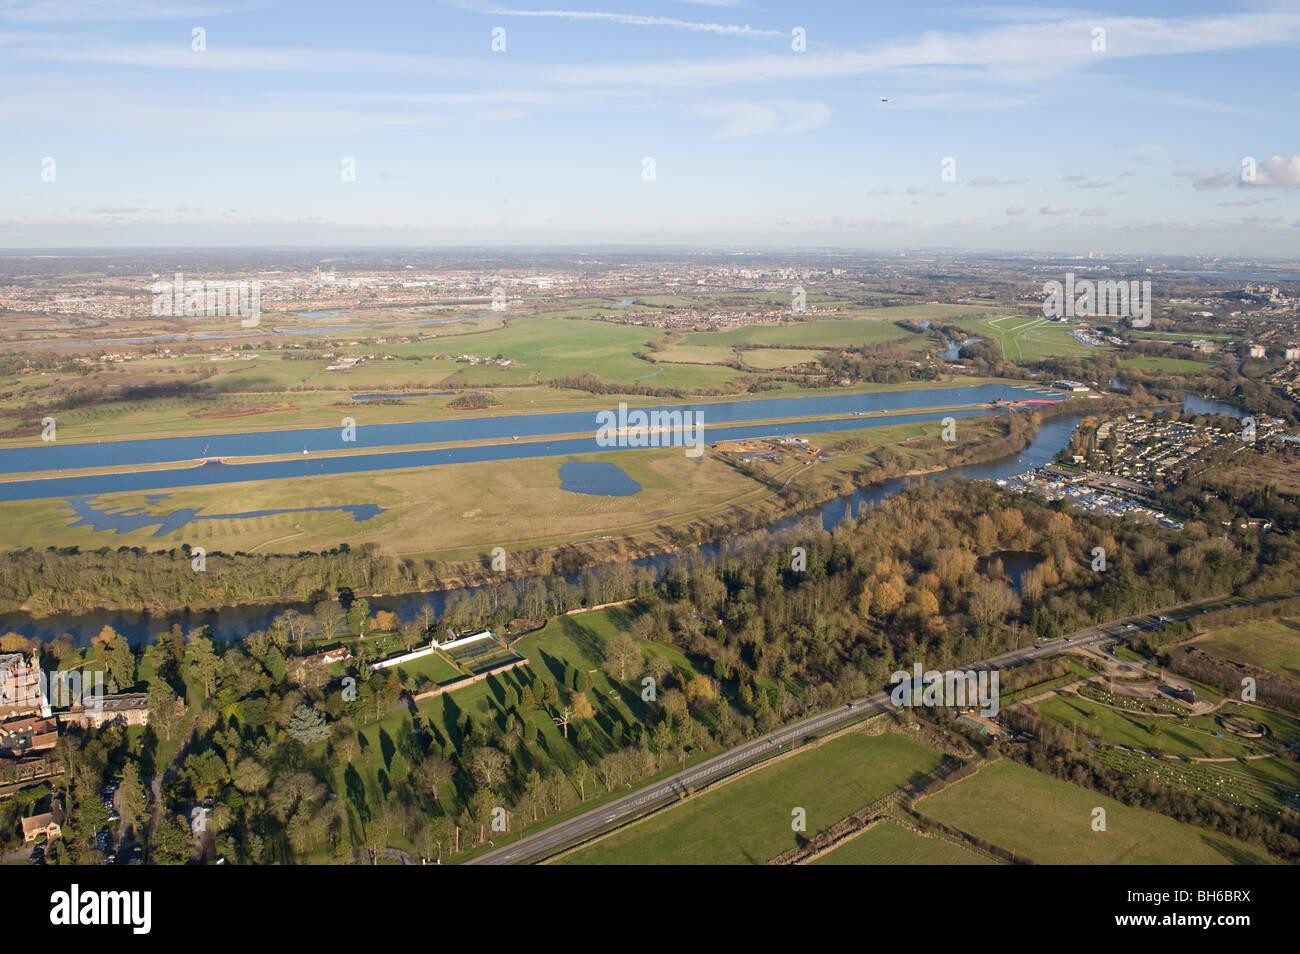 AERIAL VIEW OF DORNEY LAKES, ROWING CENTRE FOR ETON COLLEGE , WHICH WILL BE USED AS AN OLYMPIC VENUE IN 2012. Stock Photo